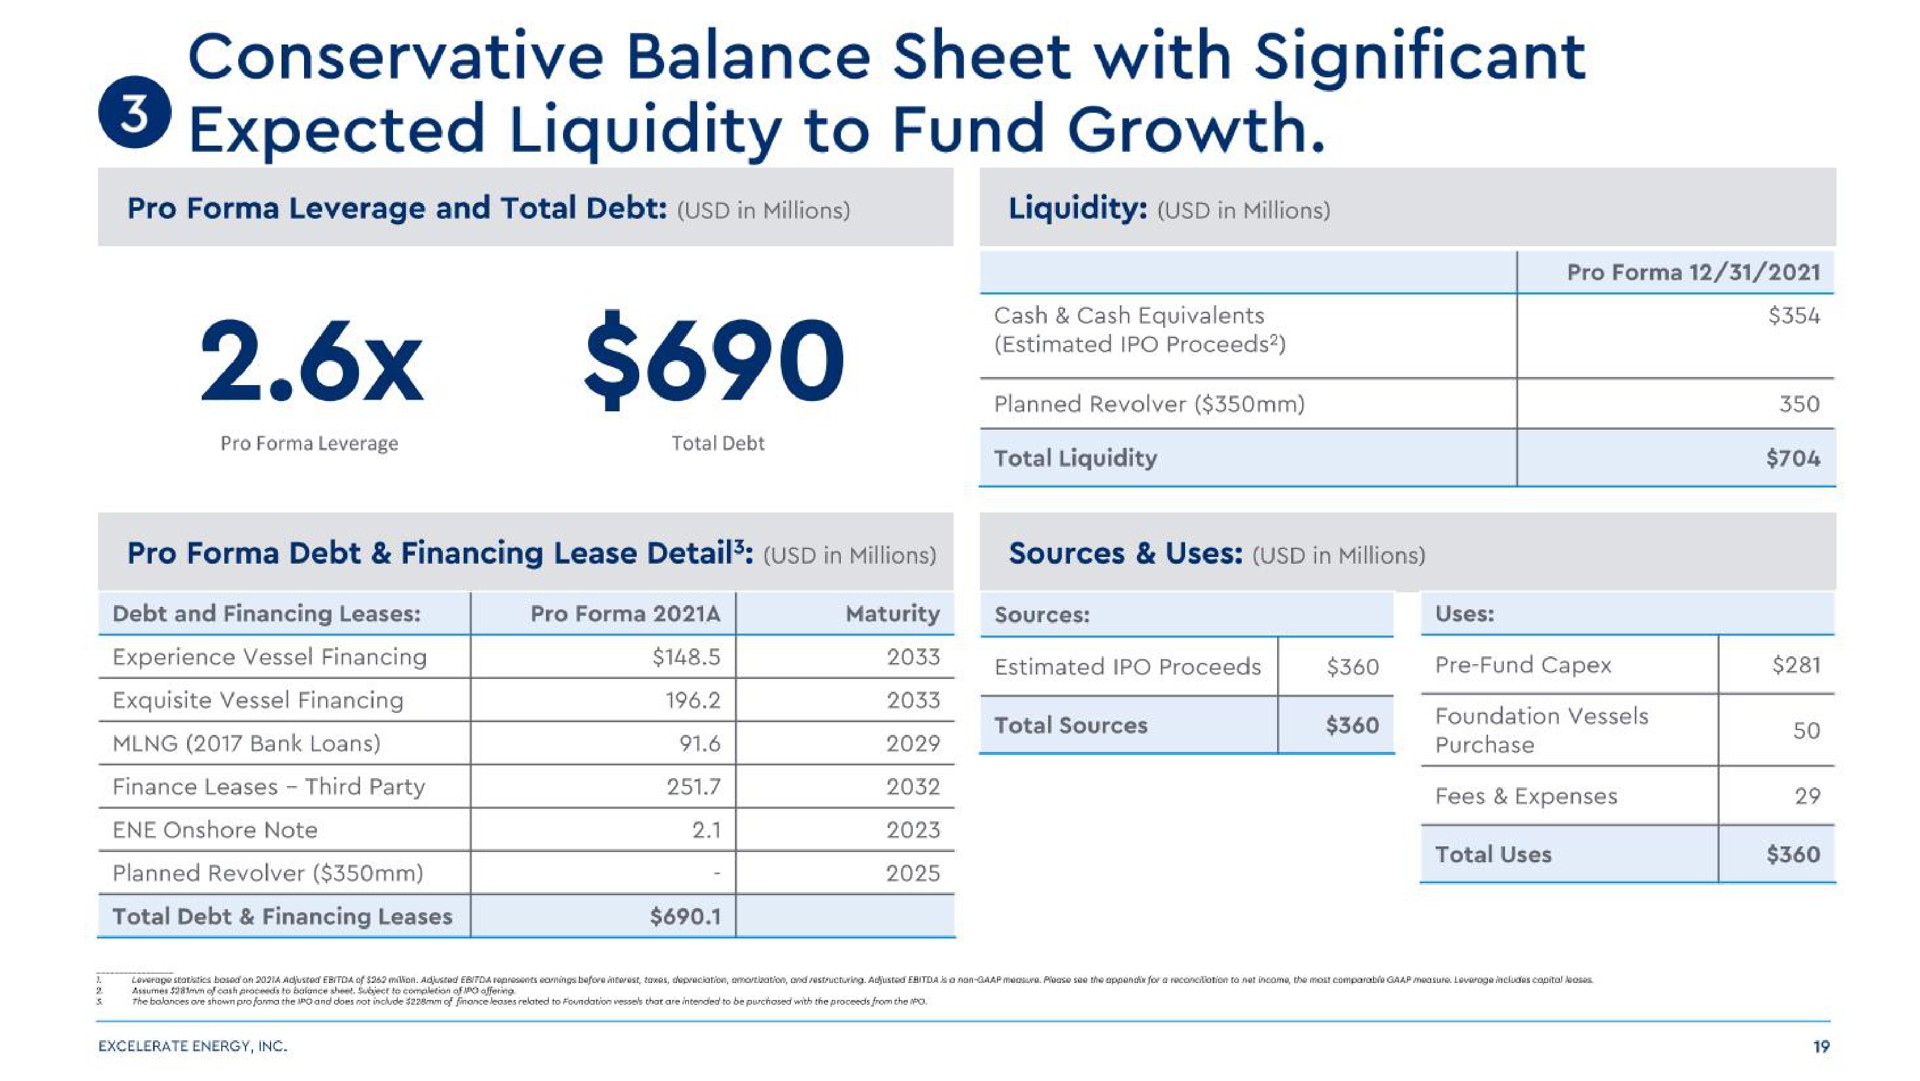 conservative balance sheet with significant expected liquidity to fund growth | Excelerate Energy